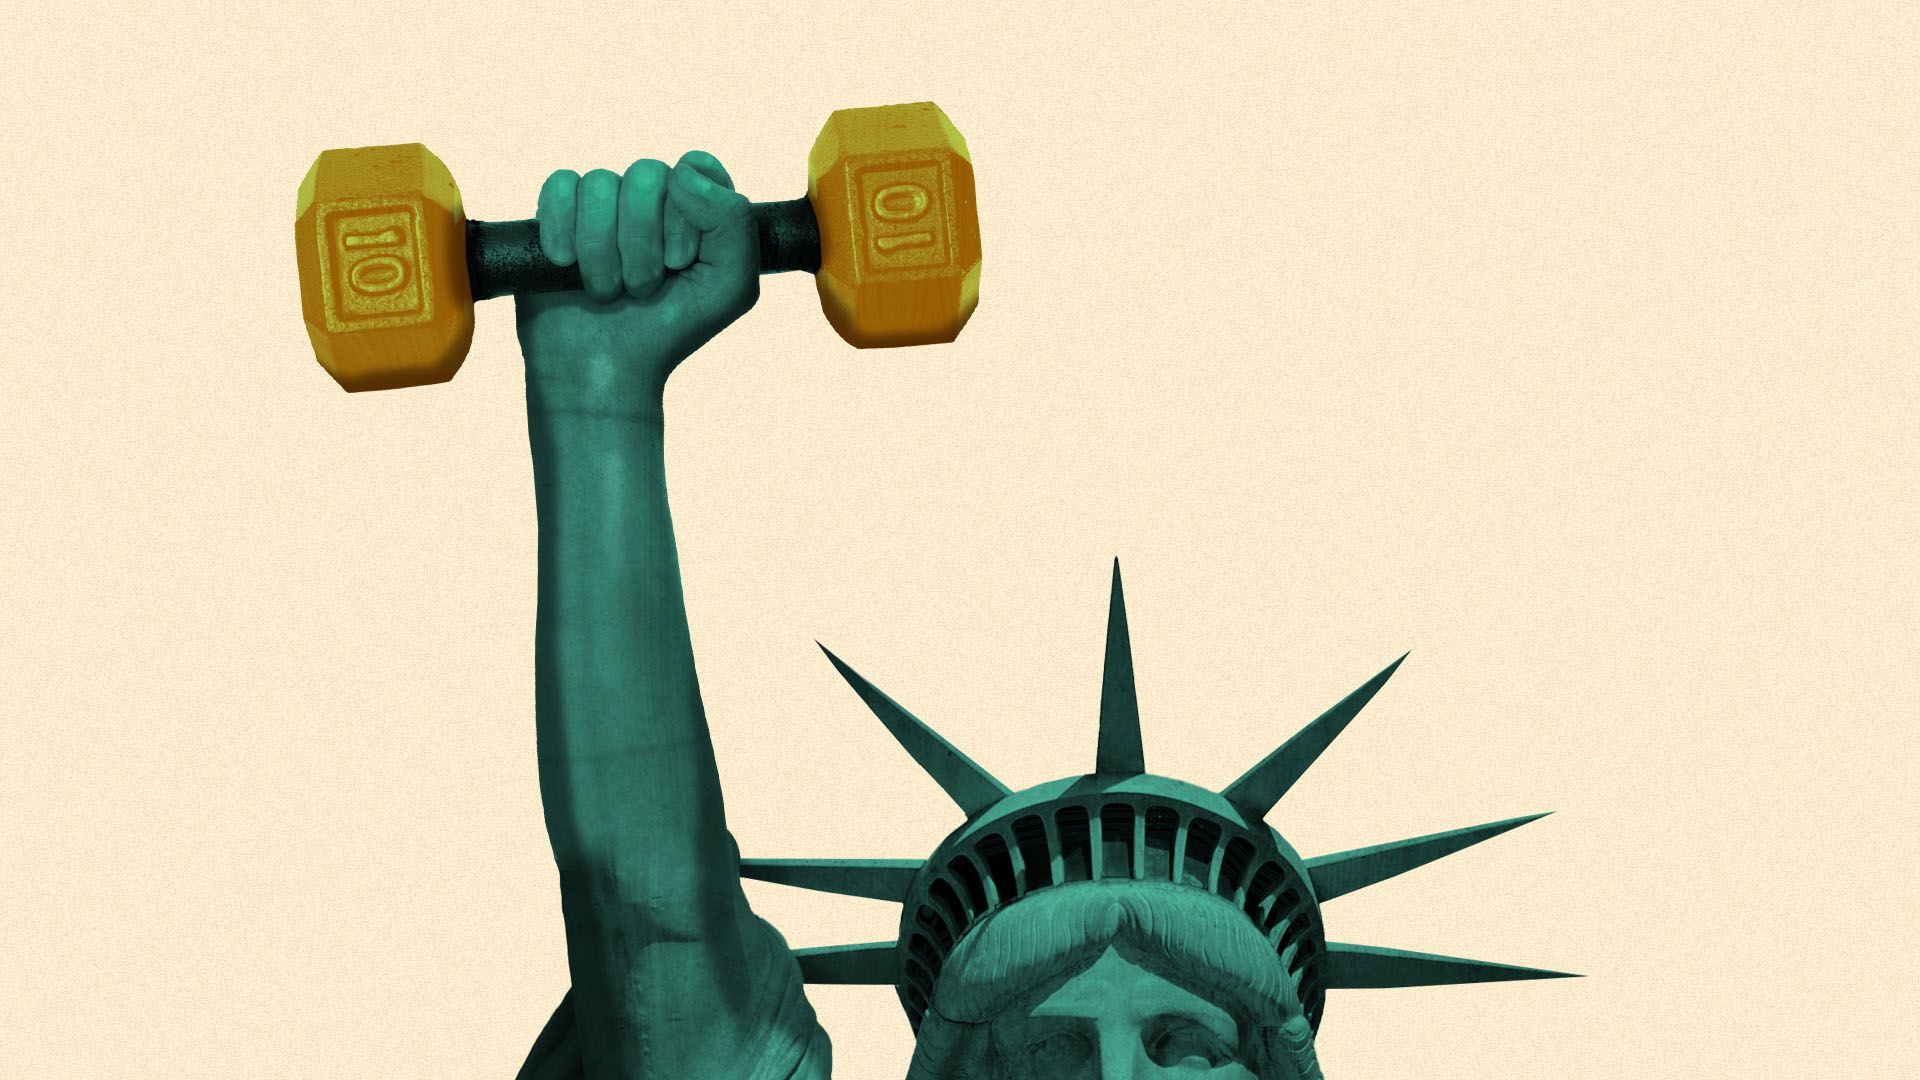 Illustration of the statue of liberty holding a dumbbell